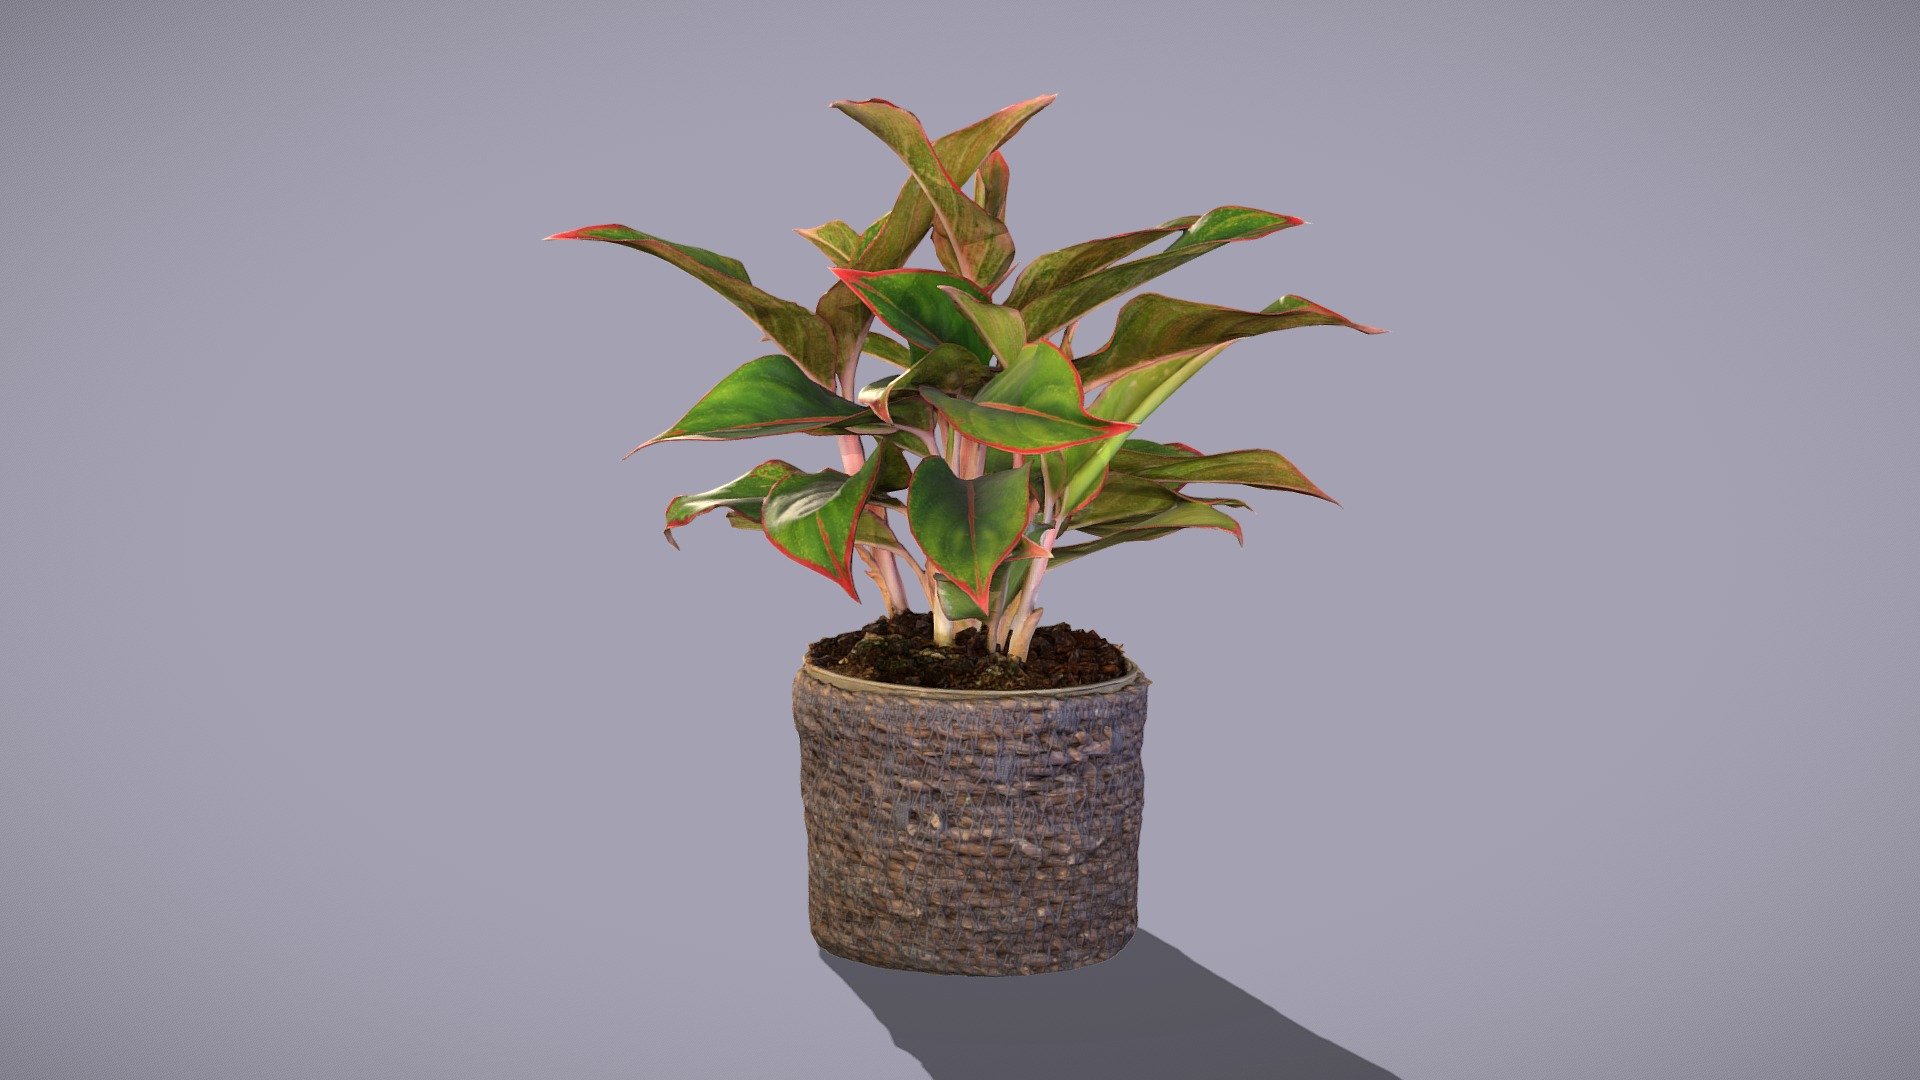 Commonly known as Chinese evergreens. This one is Red Chinese evergreen.

Photos taken with 4x24mpix cameras and various lenses.

Model includes 8k Diffuse map, 4k ambient occlusion map, 4k normal map and 4k subsurface map

Processed with Metashape + Blender + Instant meshes - Aglaonema - Buy Royalty Free 3D model by Lassi Kaukonen (@thesidekick) 3d model